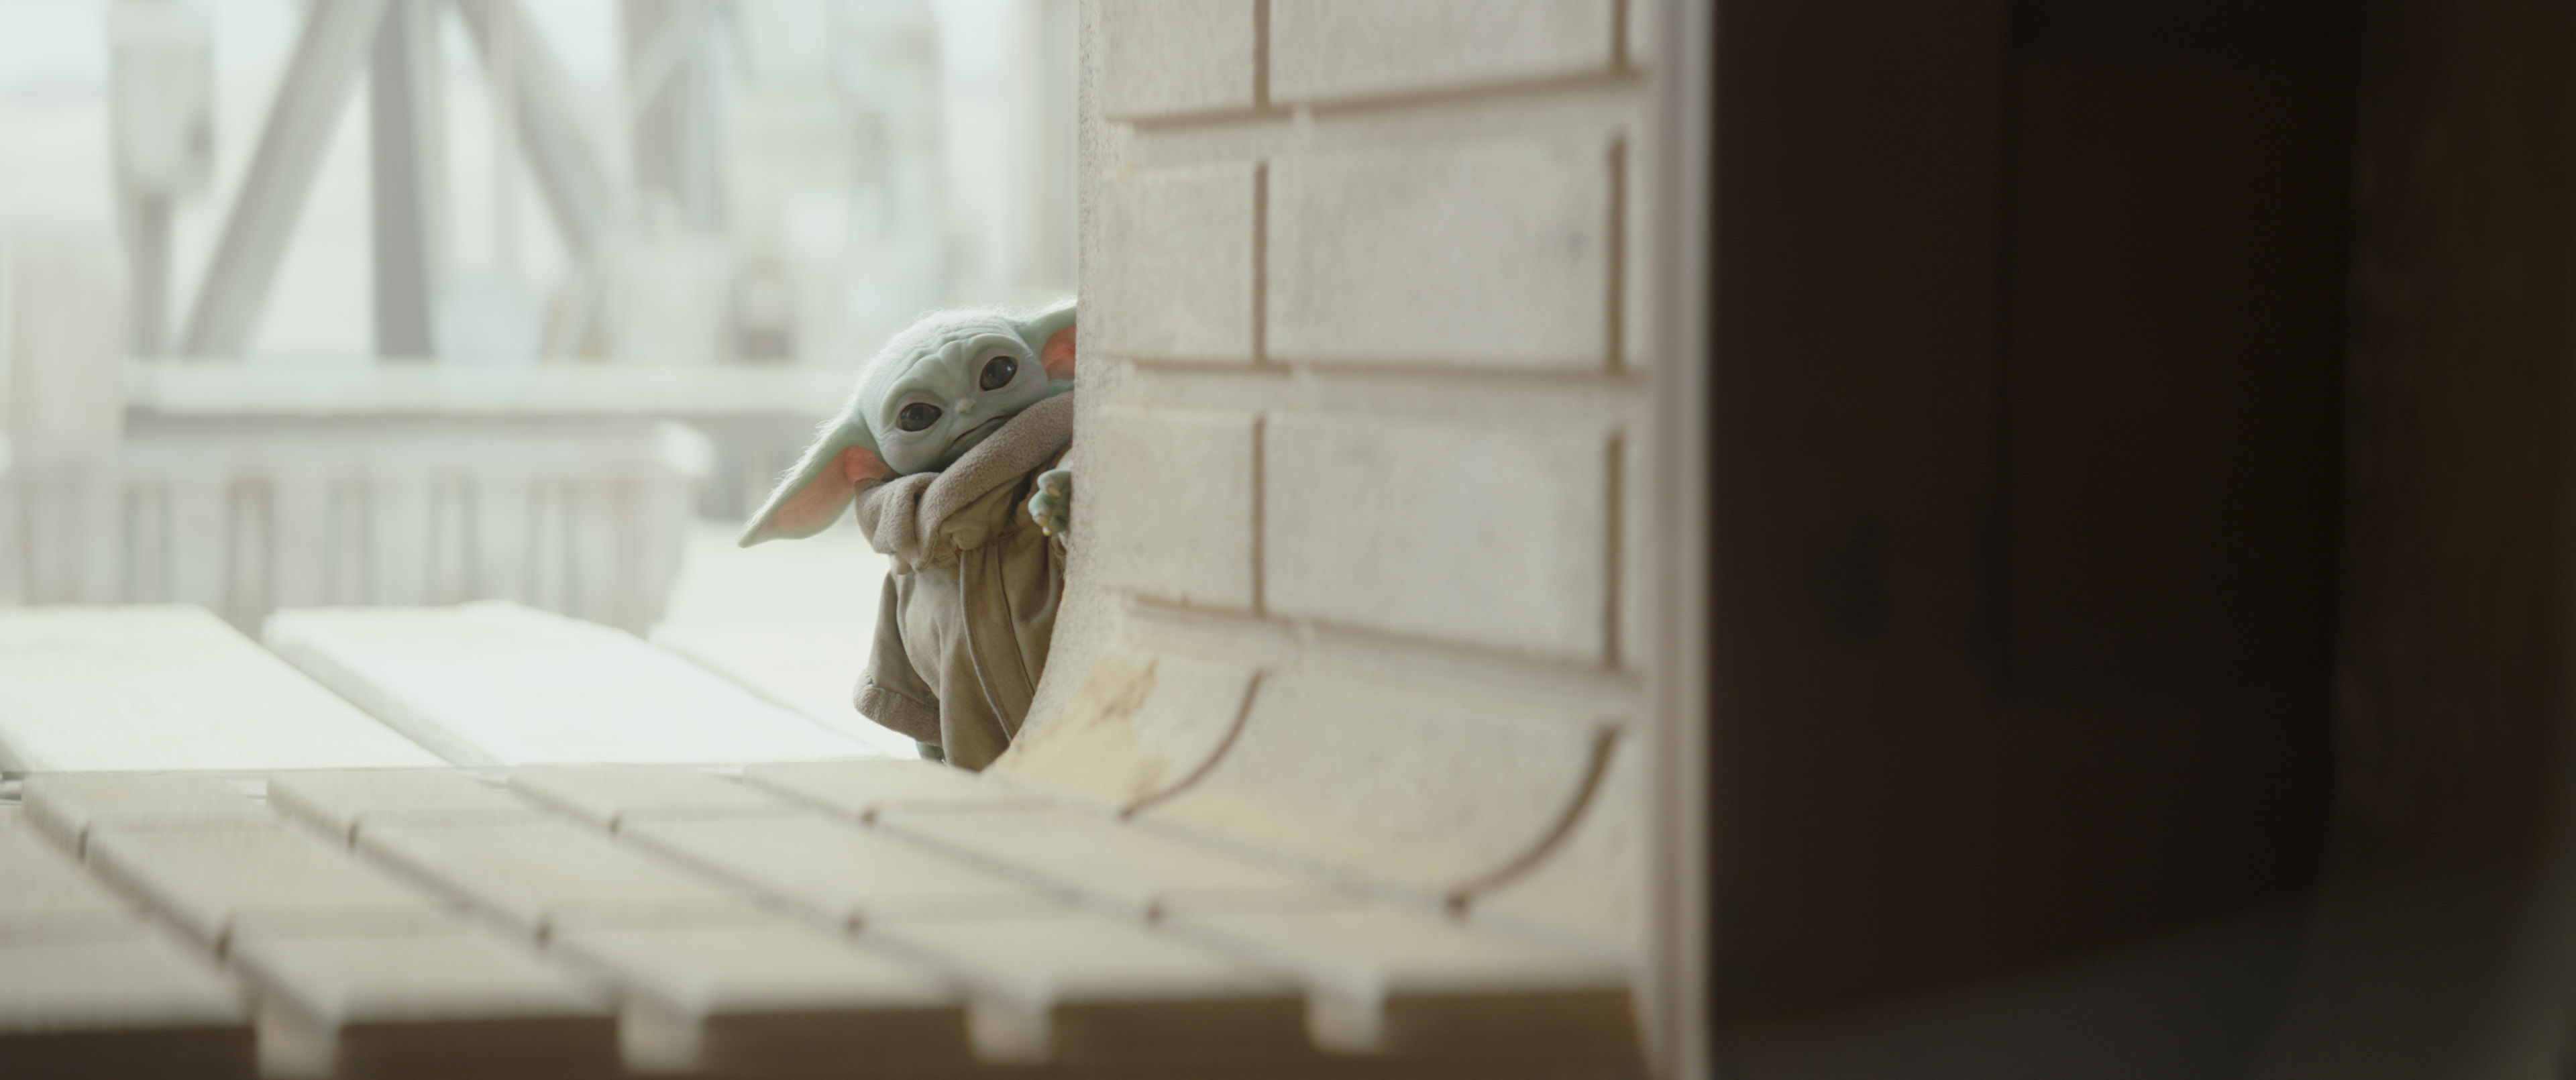 3840x1610 70+ Baby Yoda HD Wallpapers and Backgrounds